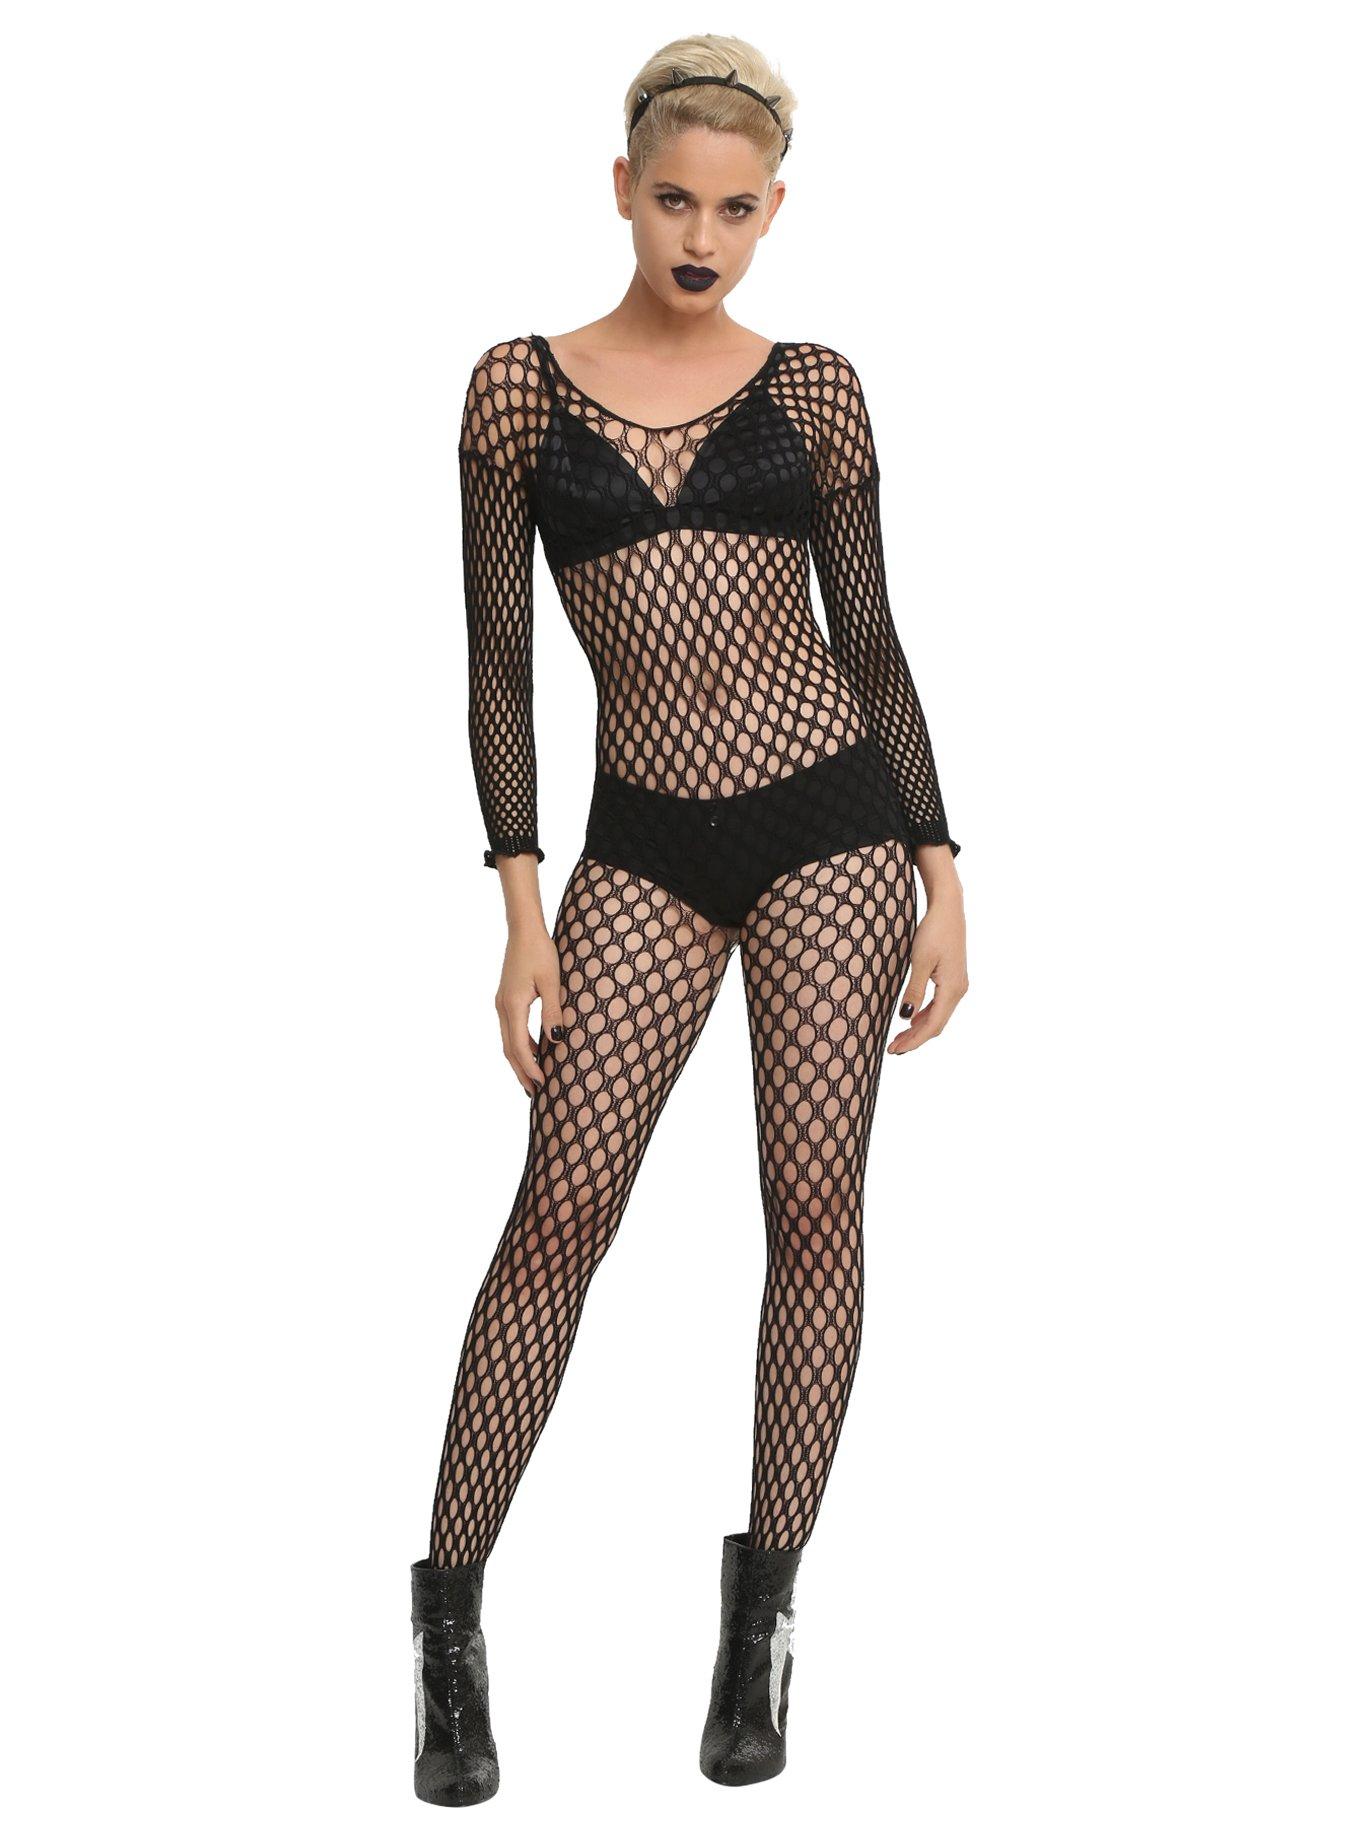 40+ Fishnet Bodysuit Stock Photos, Pictures & Royalty-Free Images